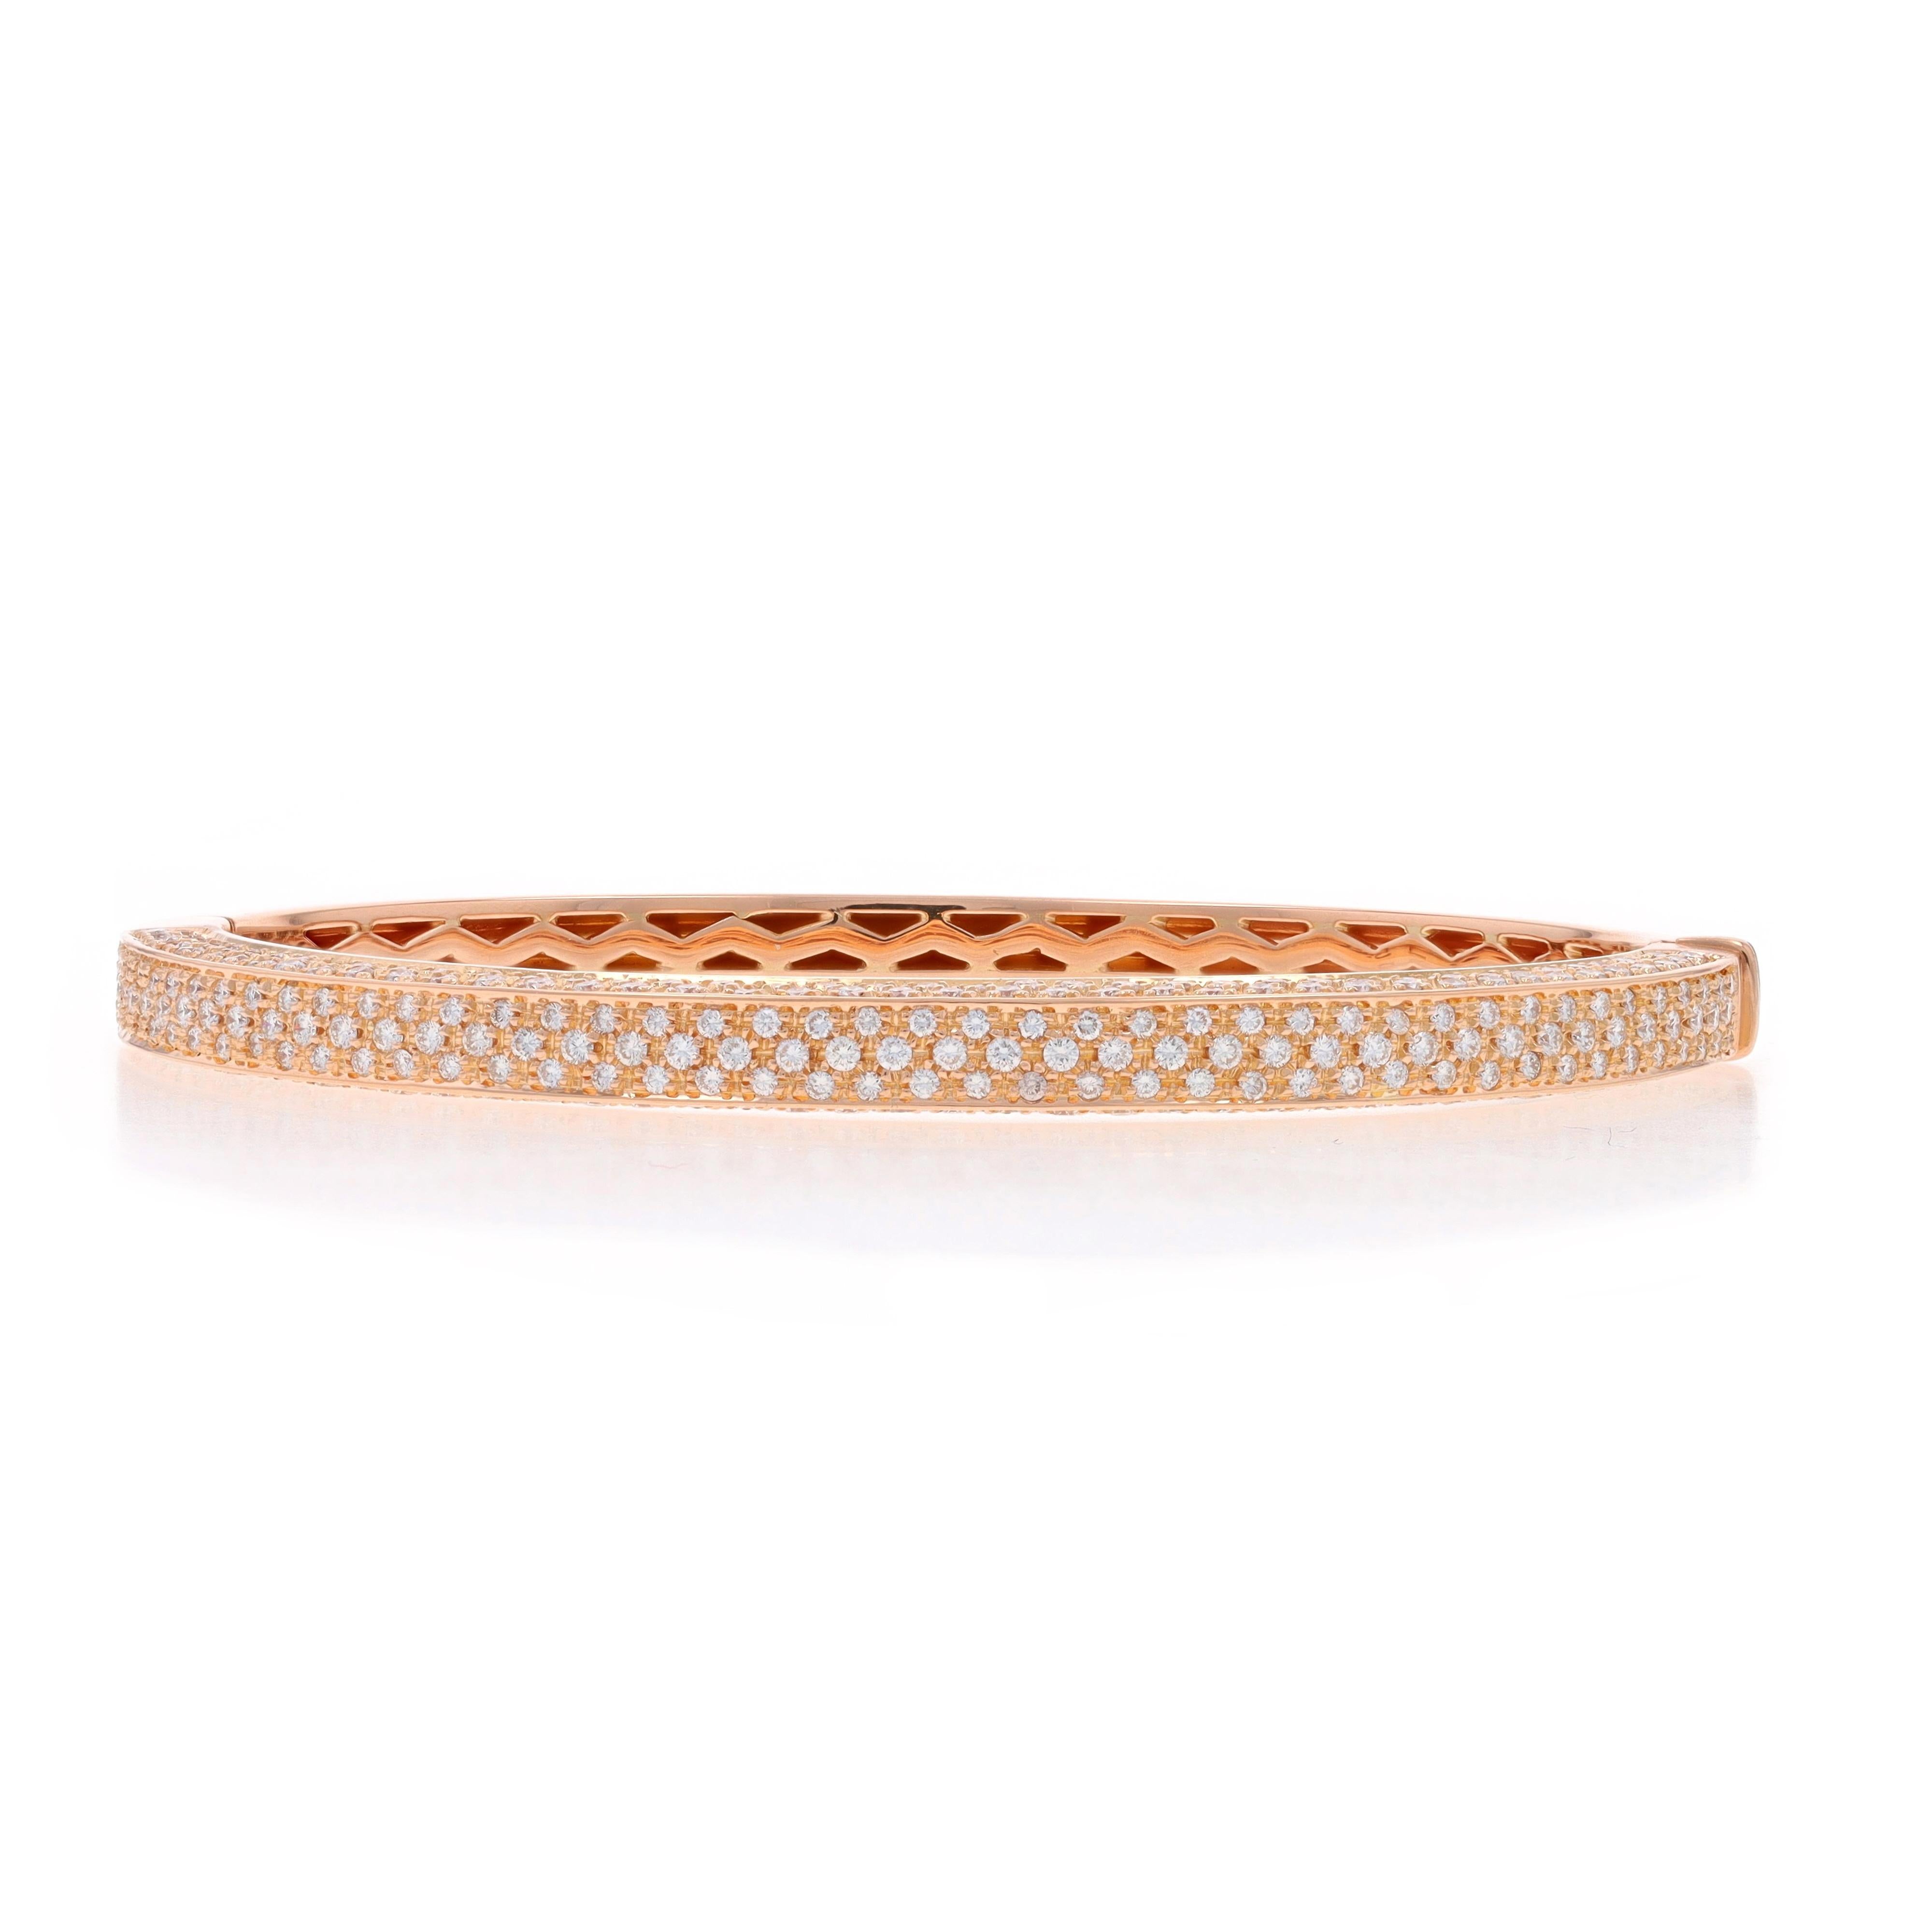 Metal Content: 18k Rose Gold

Stone Information

Natural Diamonds
Carat(s): 3.78ctw
Cut: Round Brilliant
Color: F - G
Clarity: VS1 - VS2

Total Carats: 3.78ctw

Style: Oval Bangle
Fastening Type: Tab Box Clasp
Features: Pavé Set